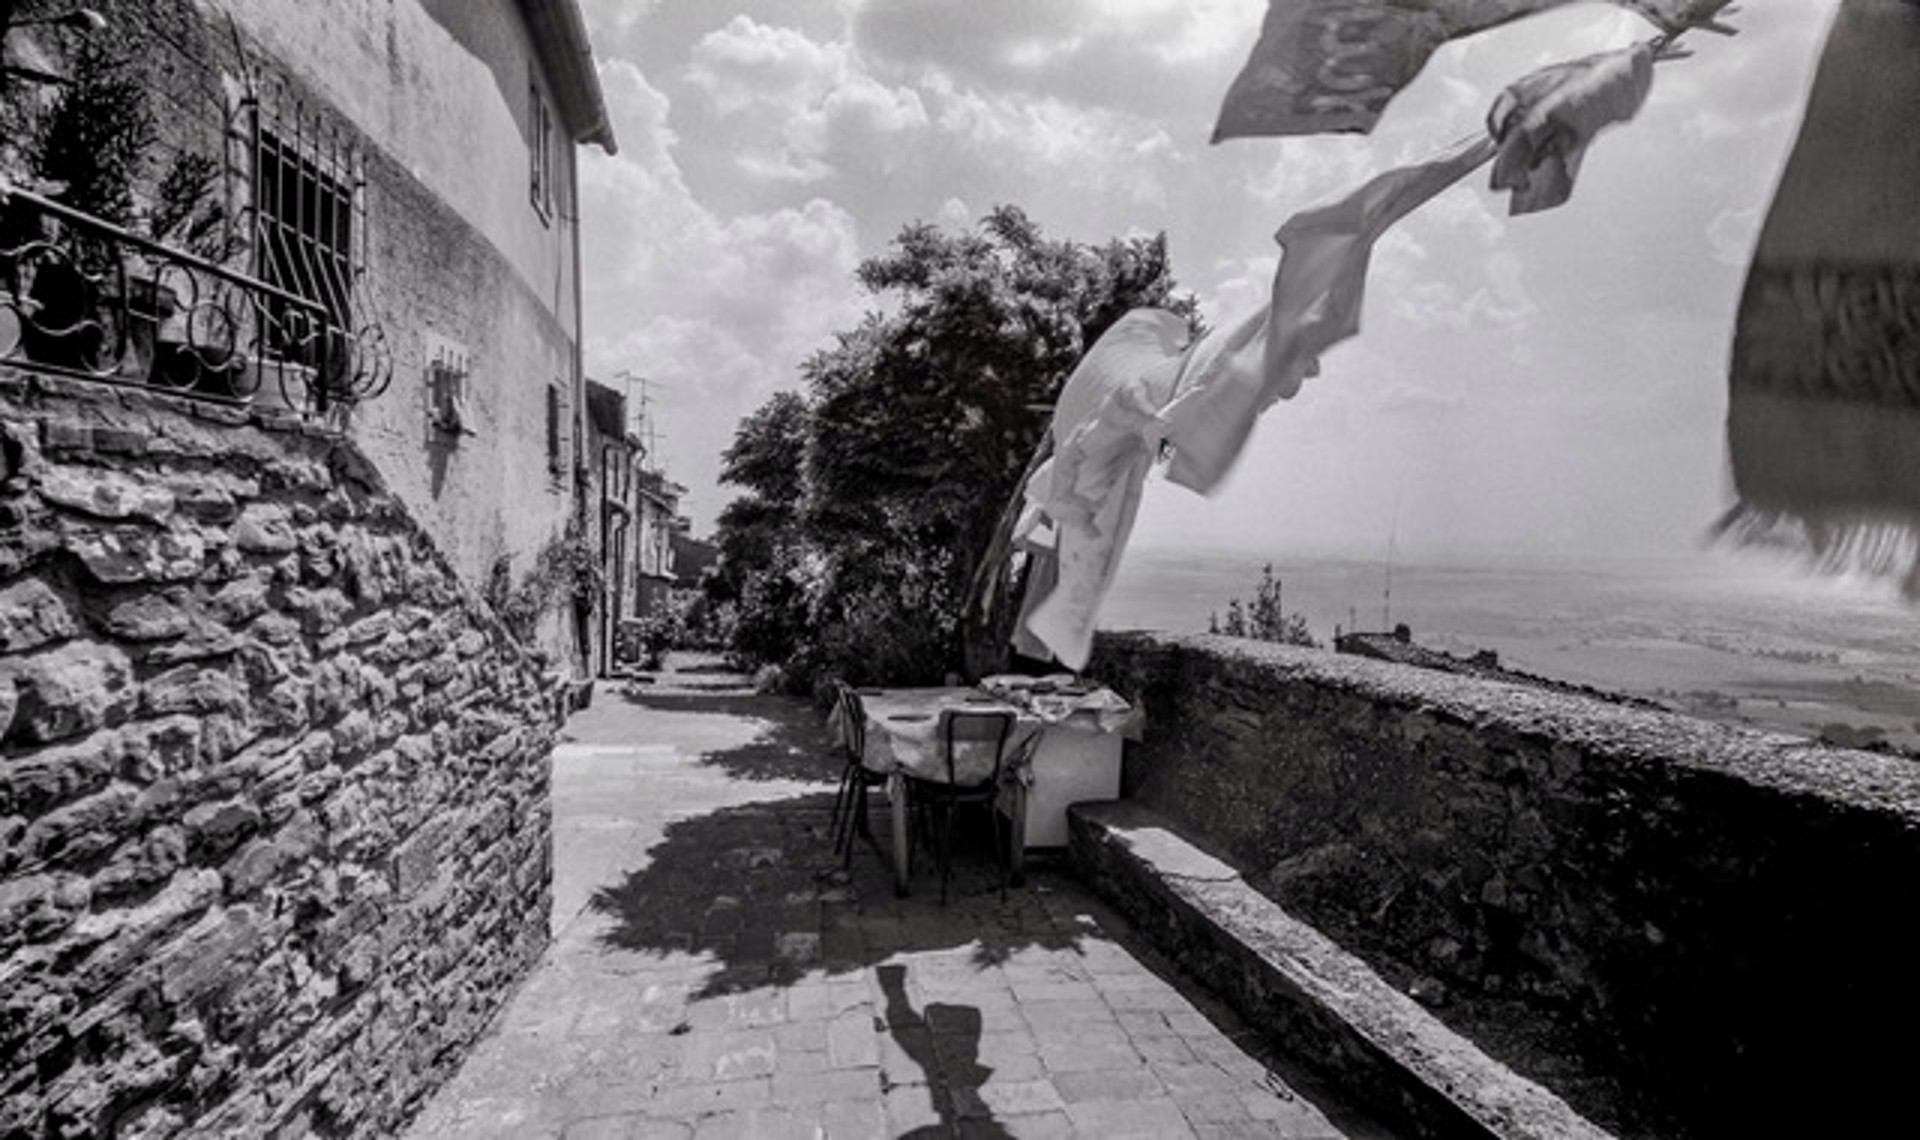 The Alleyway, Dinner Table and Cloths Drying on the Line, Cortona, Italy by Lawrence McFarland